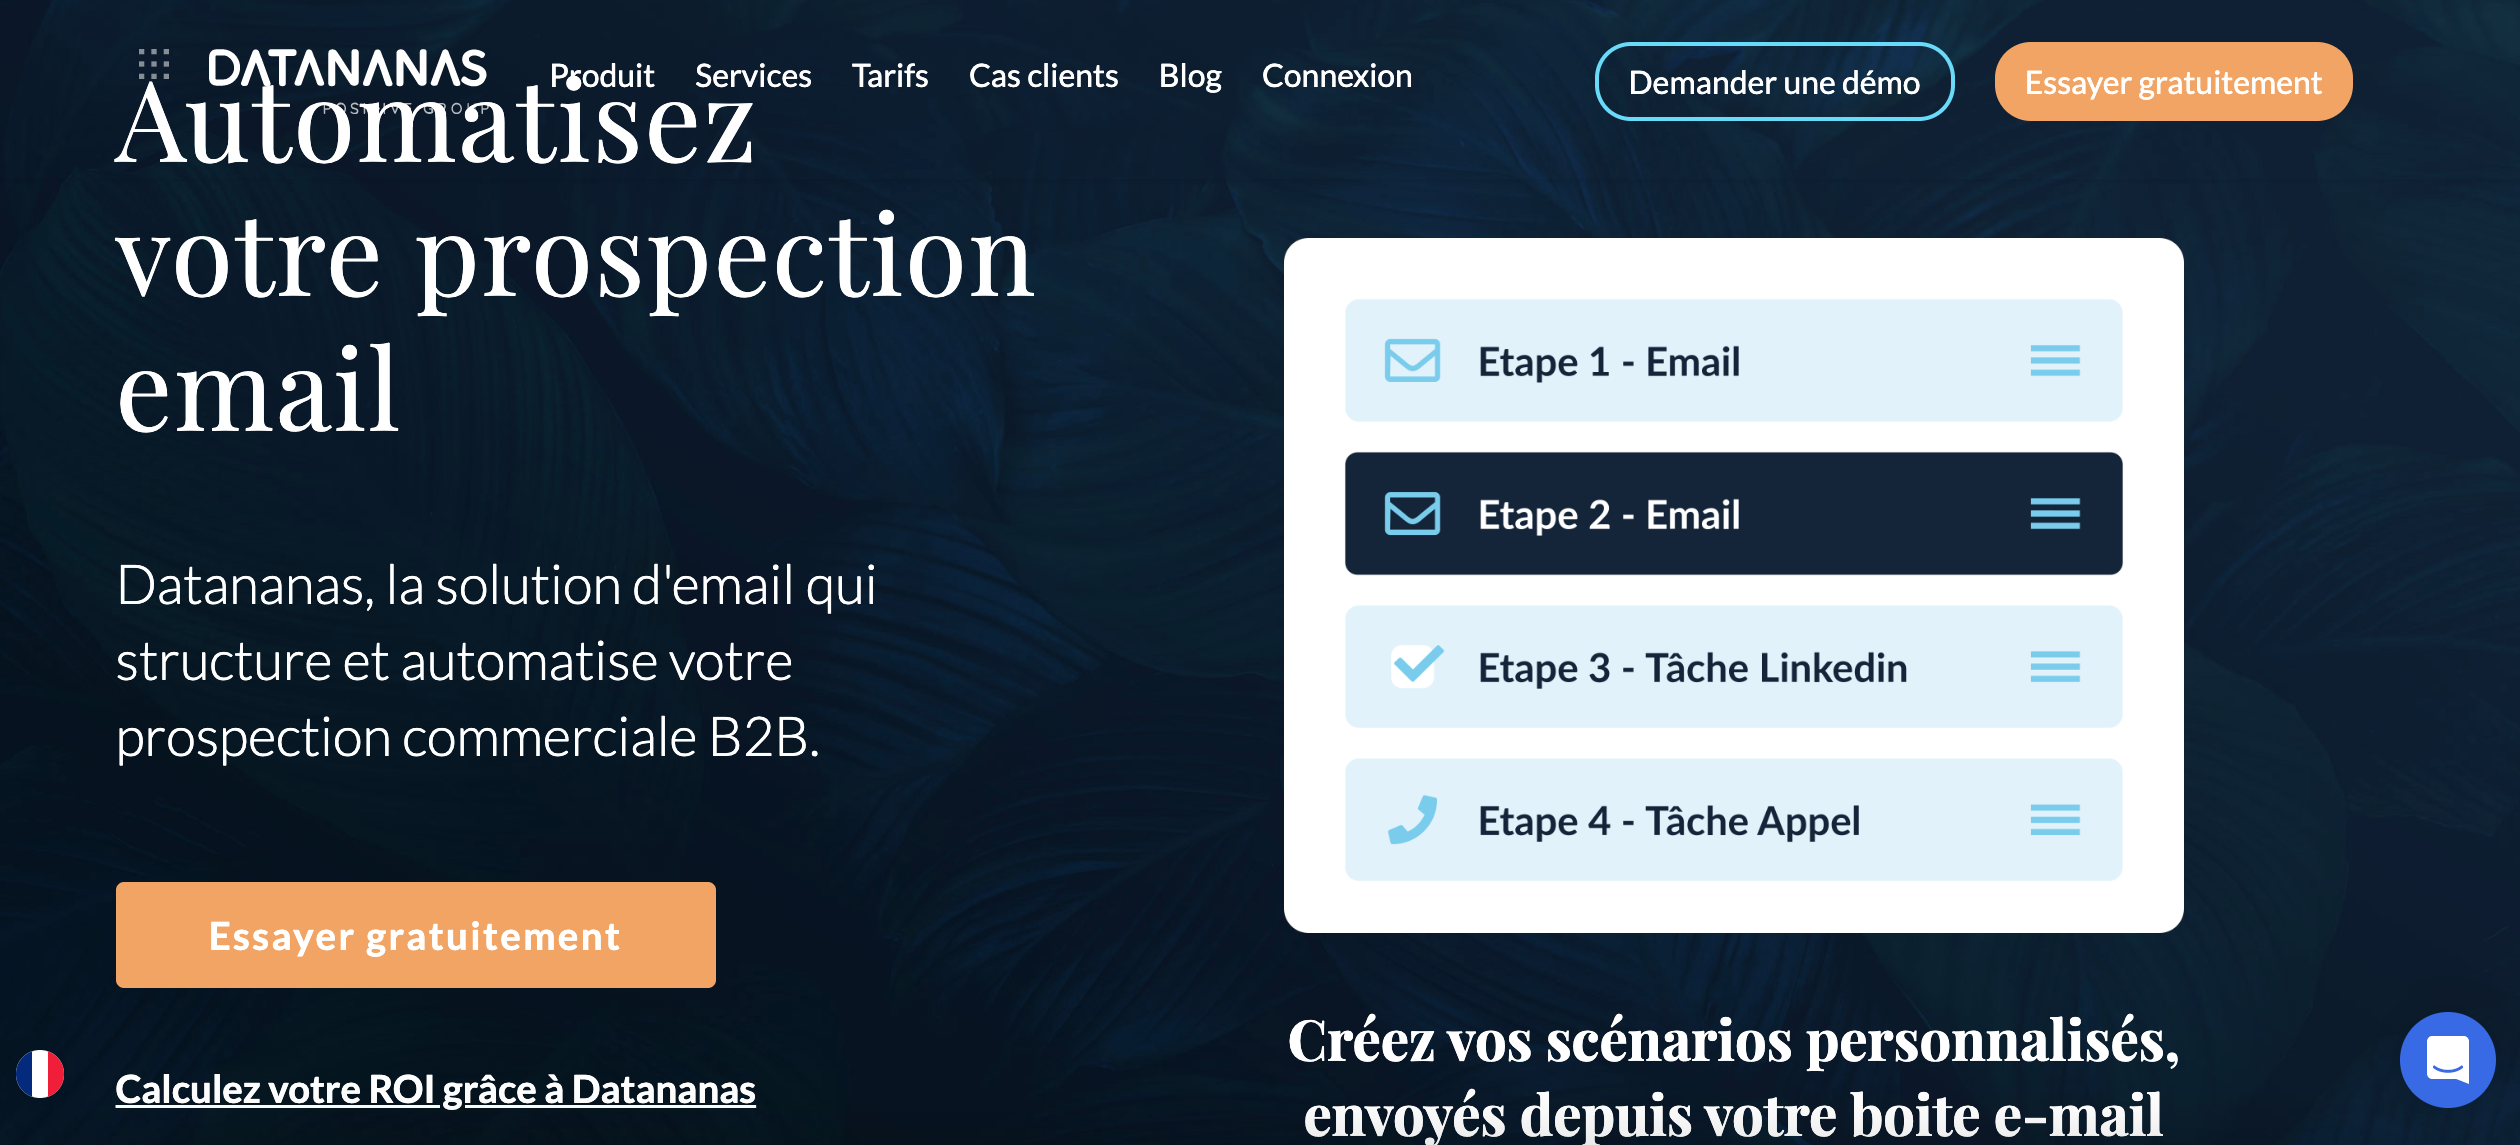 datananas-trouver-emails-prospects